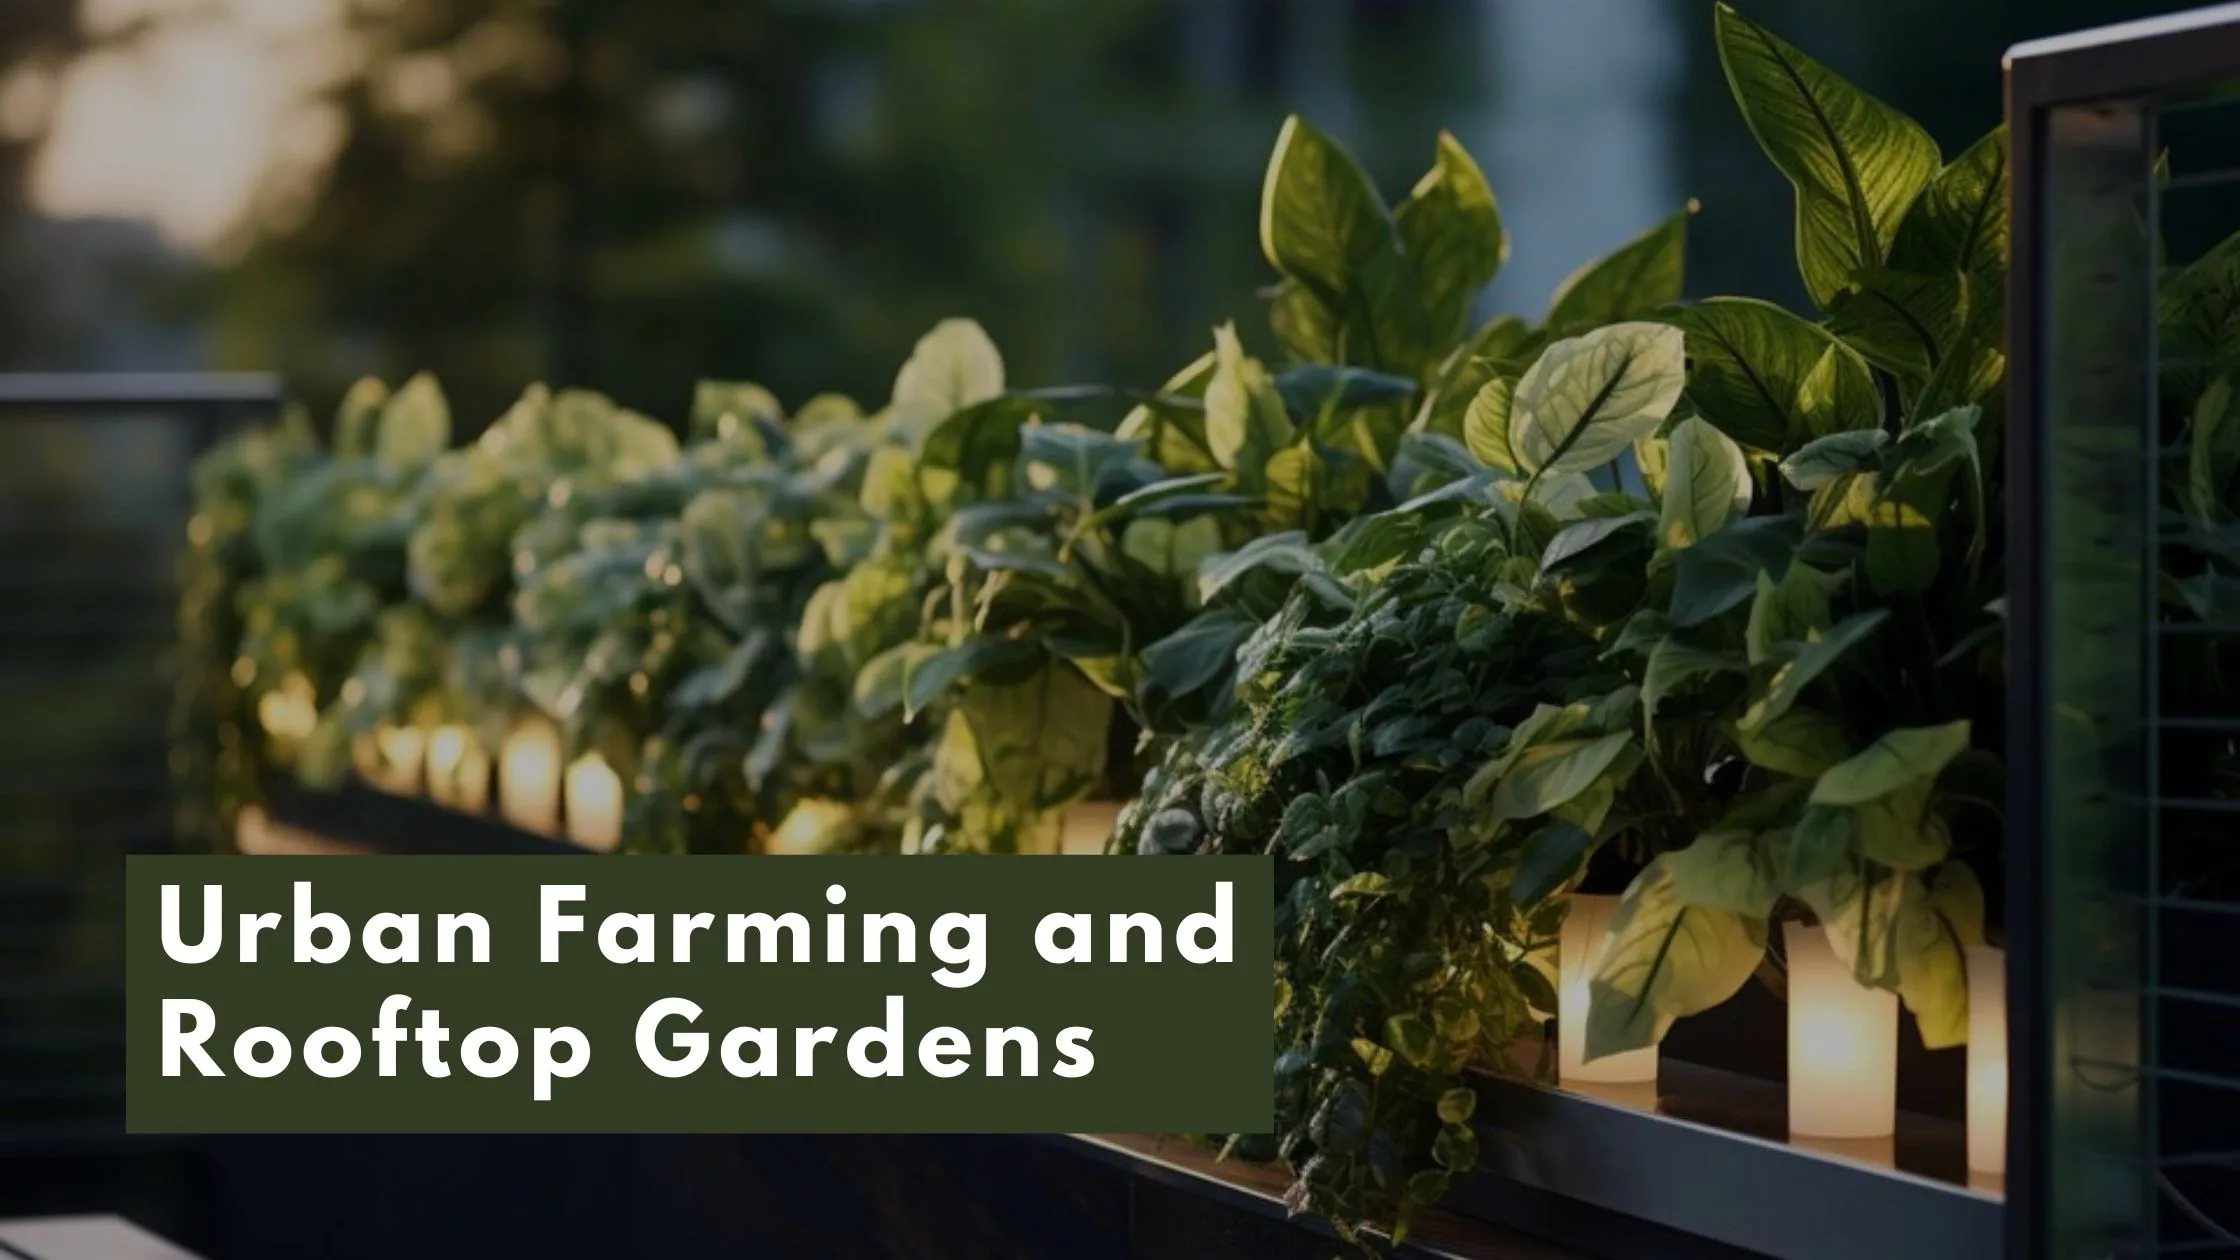 Urban Farming and Rooftop Gardens